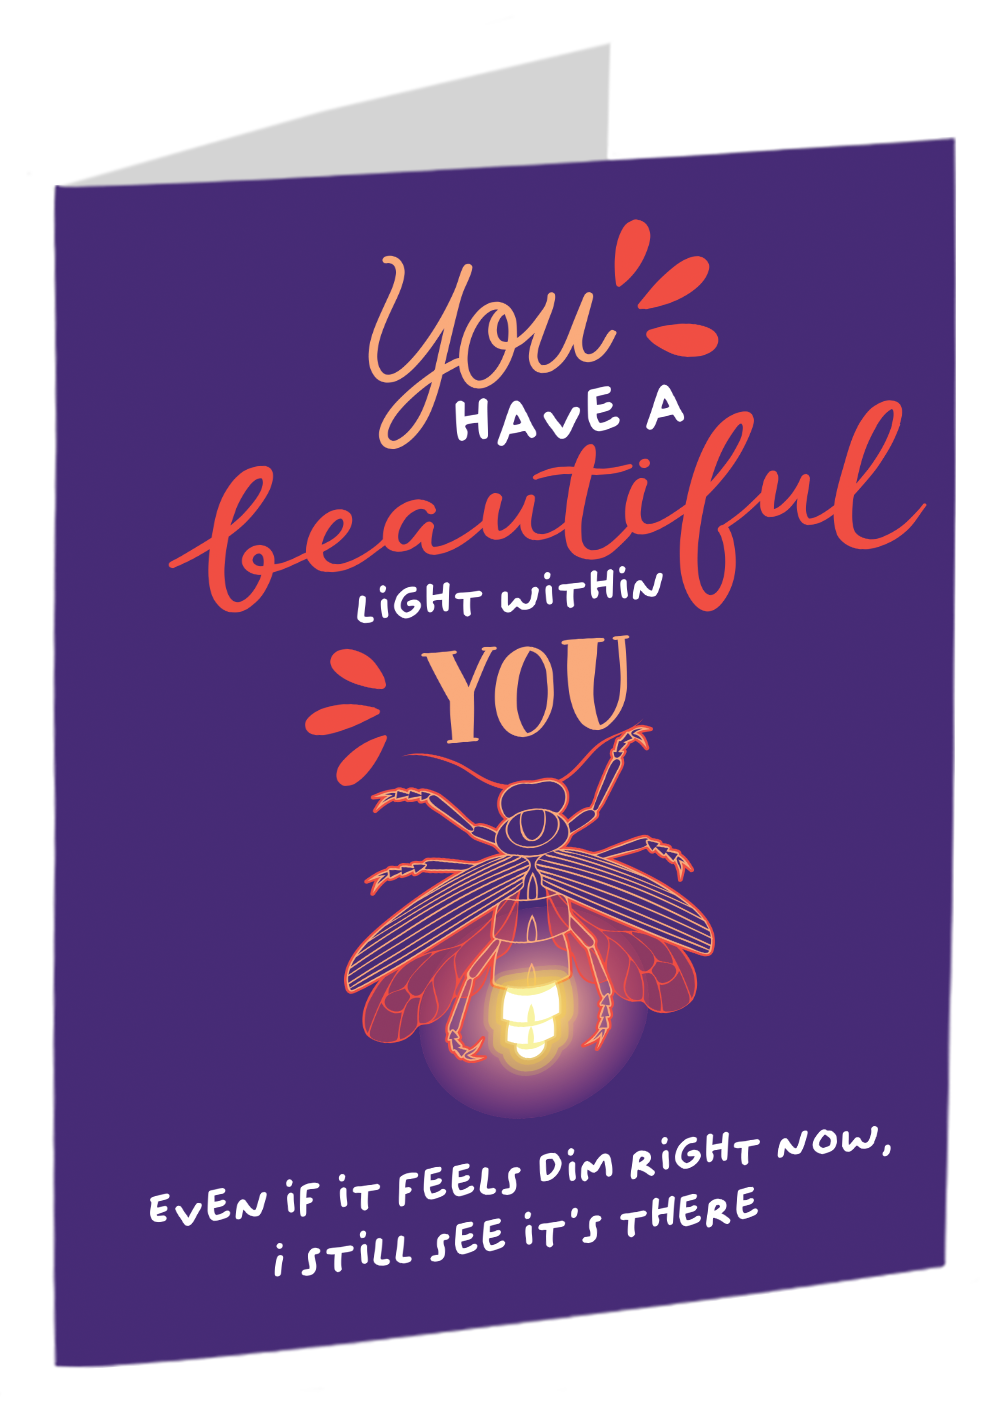 "You Have A Beautiful Light Within You. Even If It Feels Dim Right Now, I Still Feel It There."